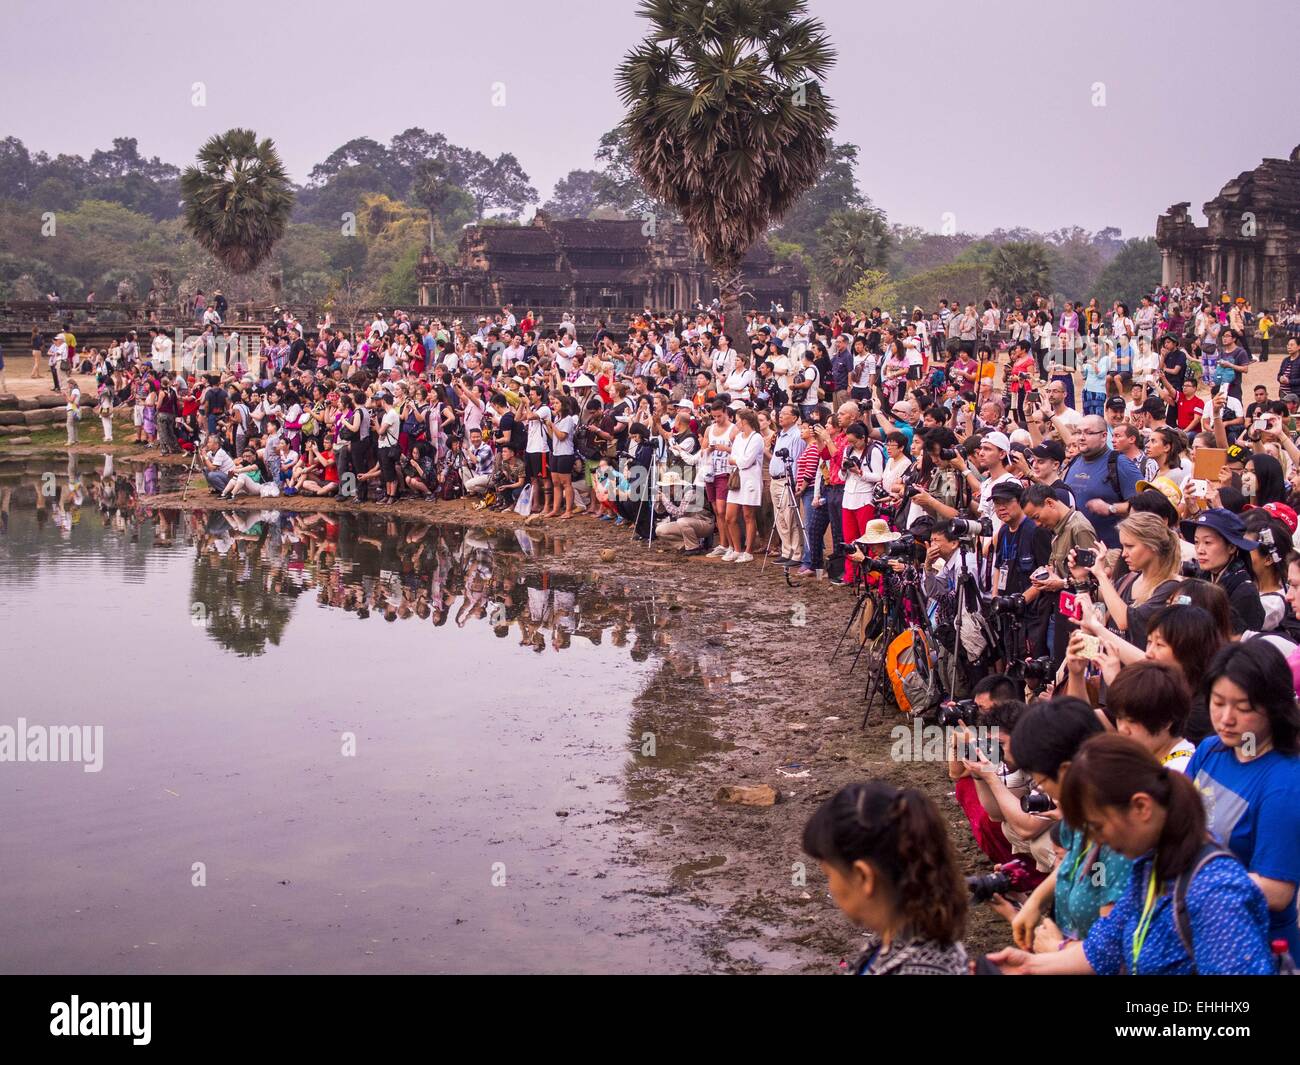 Seam Reap, Seam Reap, Cambodia. 14th Mar, 2015. Tourists gathered around the reflecting pool in front of Angkor Wat wait for the sunrise. The area known as ''Angkor Wat'' is a sprawling collection of archeological ruins and temples. The area was developed by ancient Khmer (Cambodian) Kings starting as early as 1150 CE and renovated and expanded around 1180CE by Jayavarman VII. Angkor Wat is now considered the seventh wonder of the world and is Cambodia's most important tourist attraction. © Jack Kurtz/ZUMA Wire/Alamy Live News Stock Photo